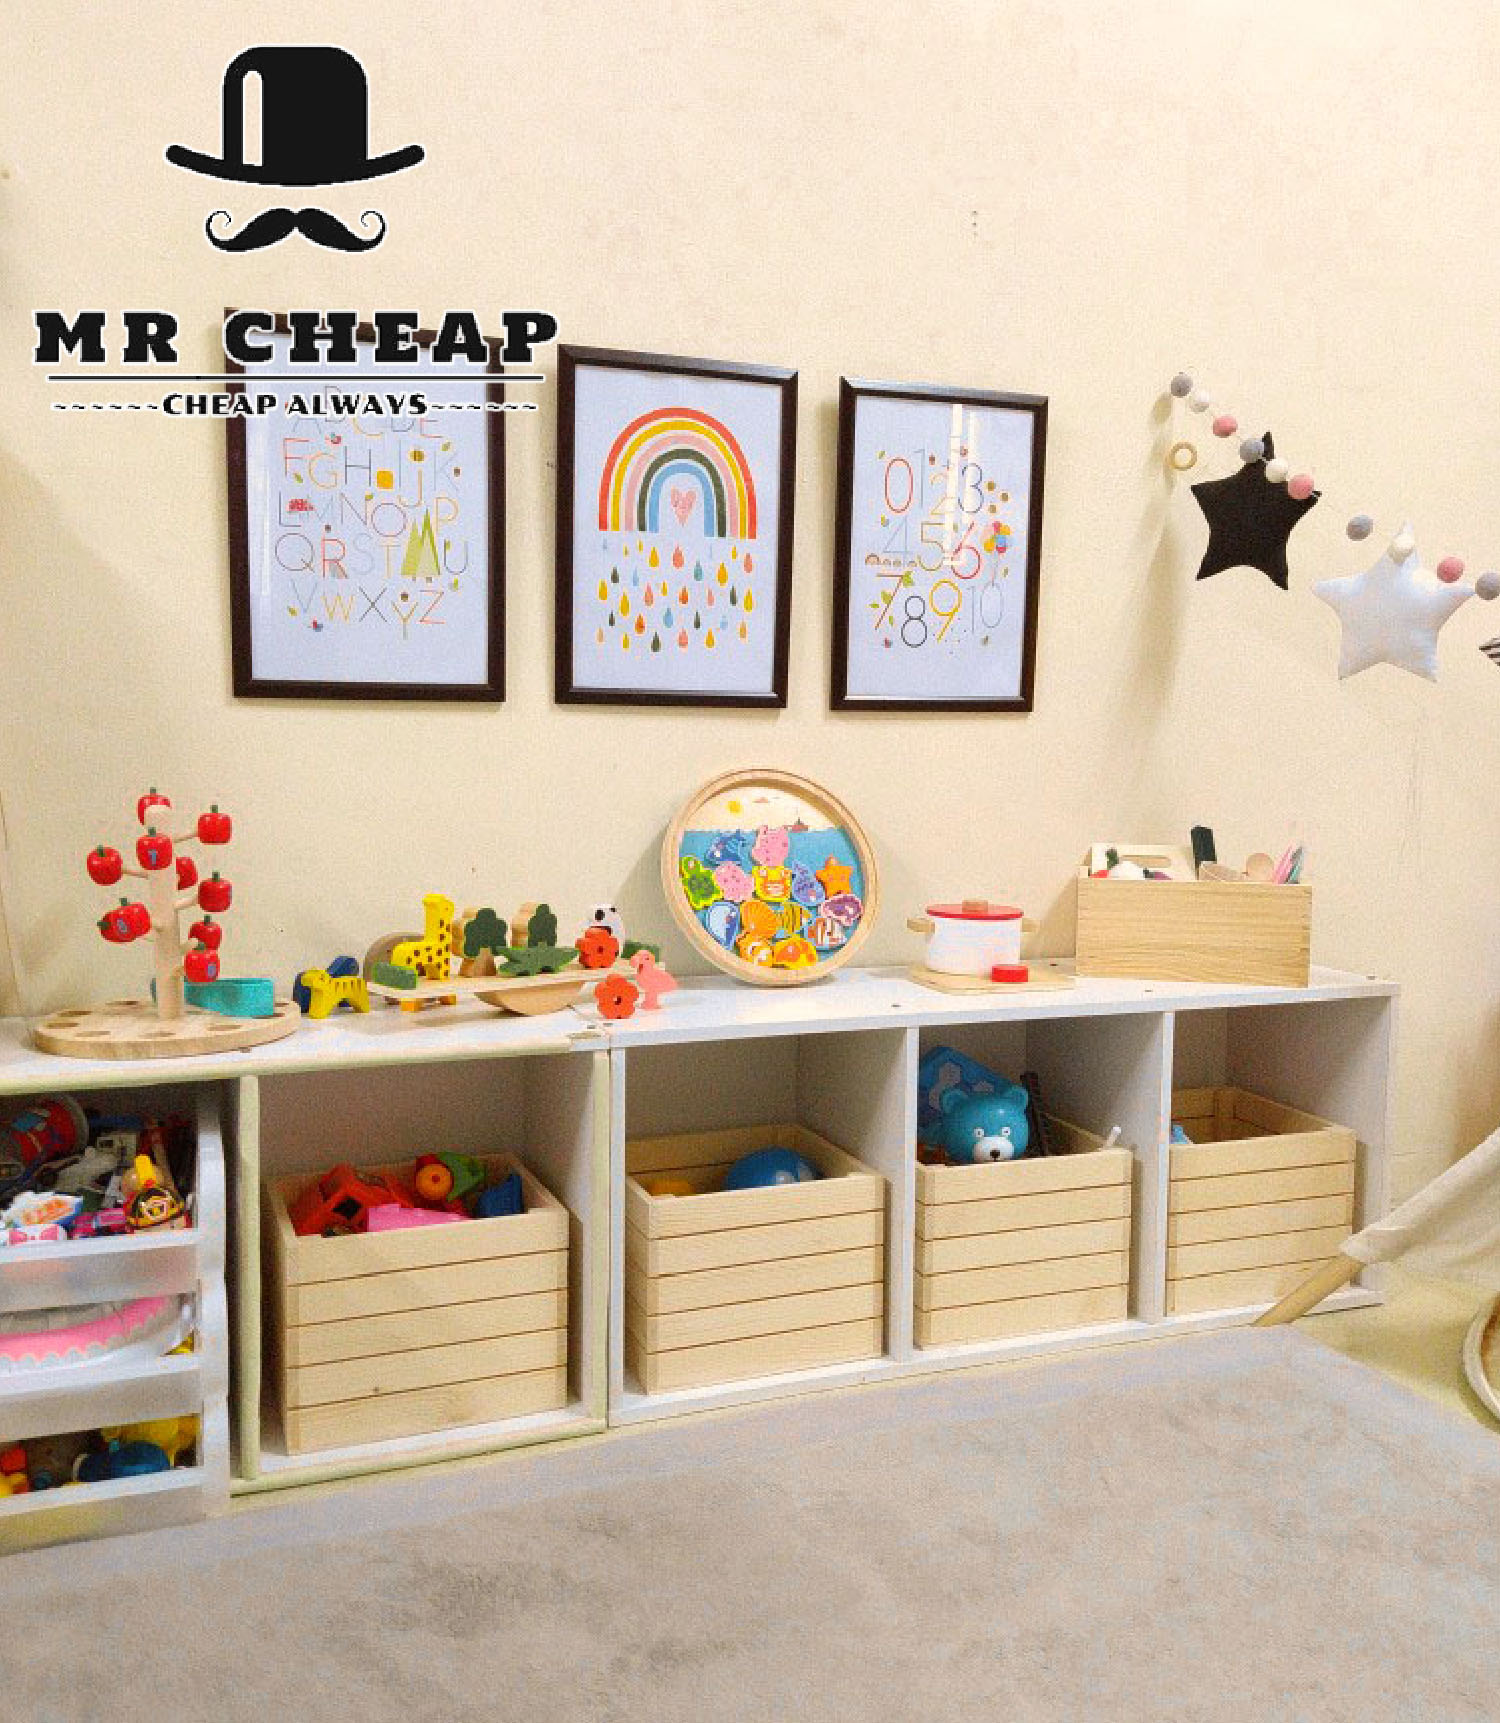 Pine Wood Crates Storage | Mr Cheap - Customize Wood Products Specialist